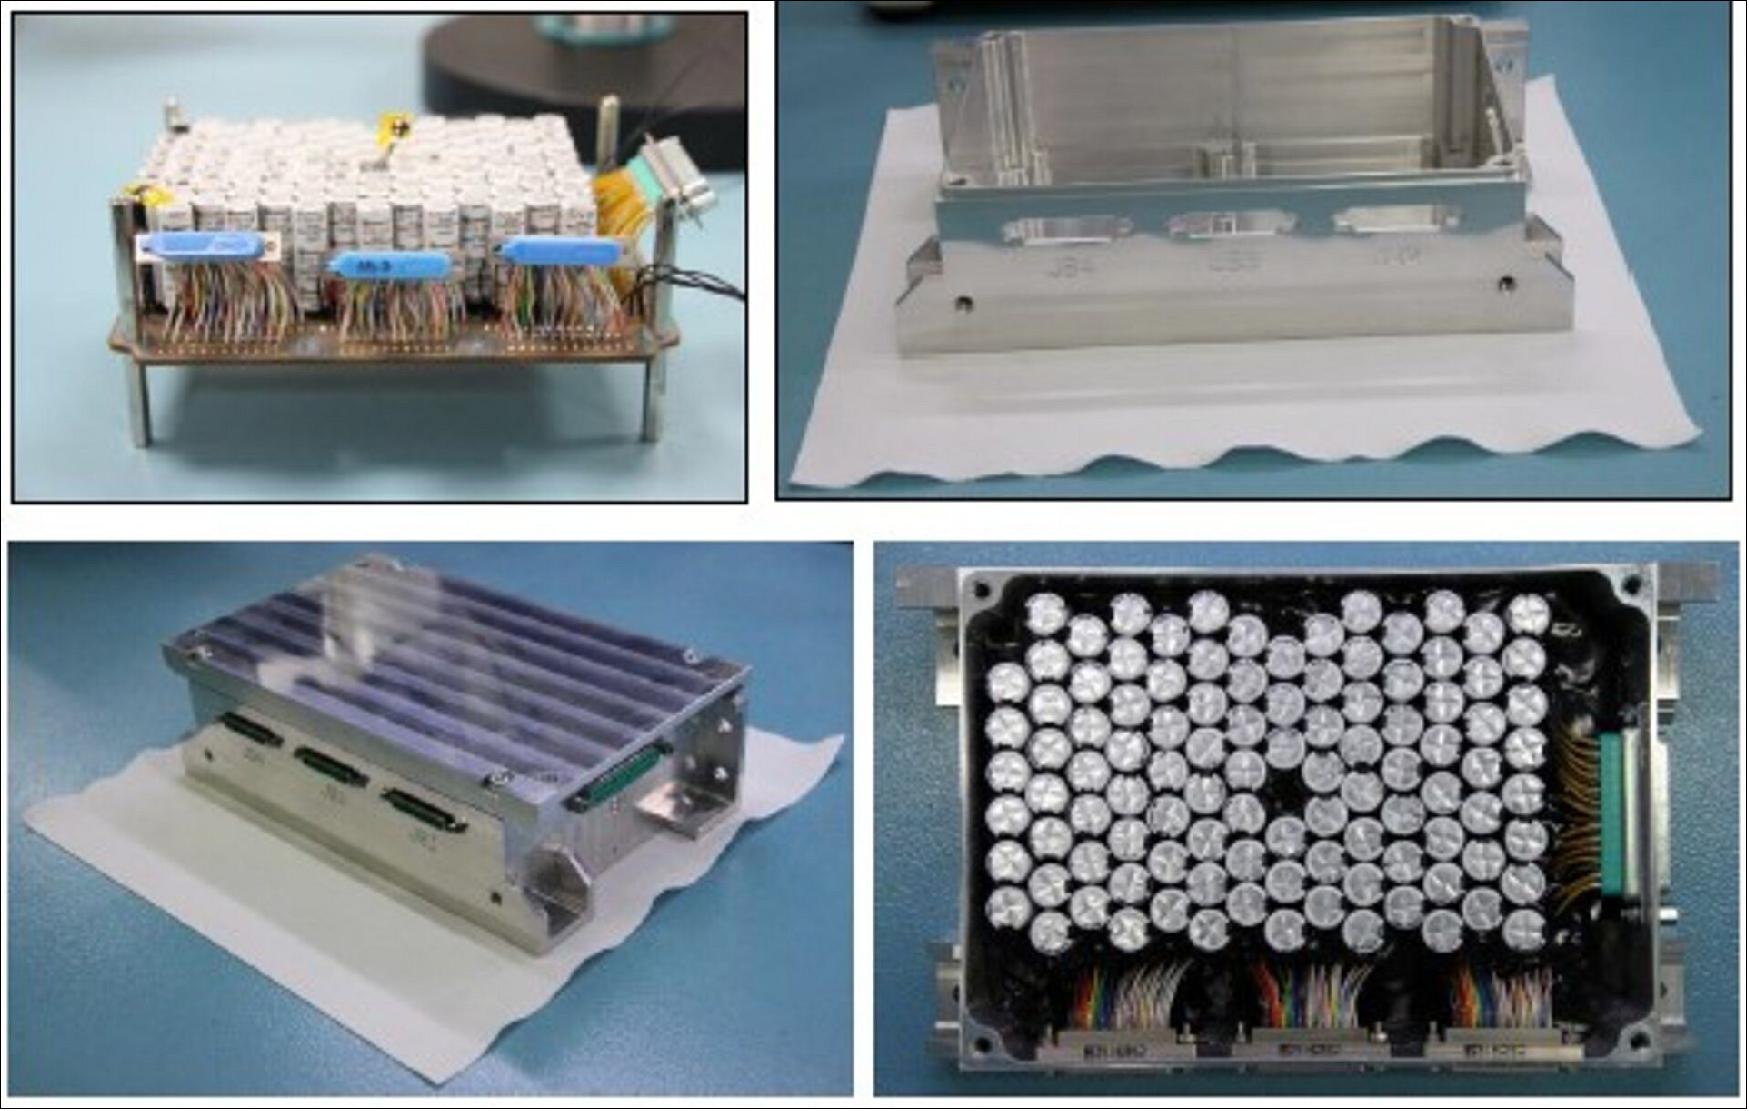 Figure 2: This engineering model of BOSC (Bank of Supercapacitors) was developed for testing, based on 34 supercapacitors in series with three strings in parallel, incorporating thermal sensors to keep it from overheating and degrading (image credit: ESA/Airbus Defence and Space)